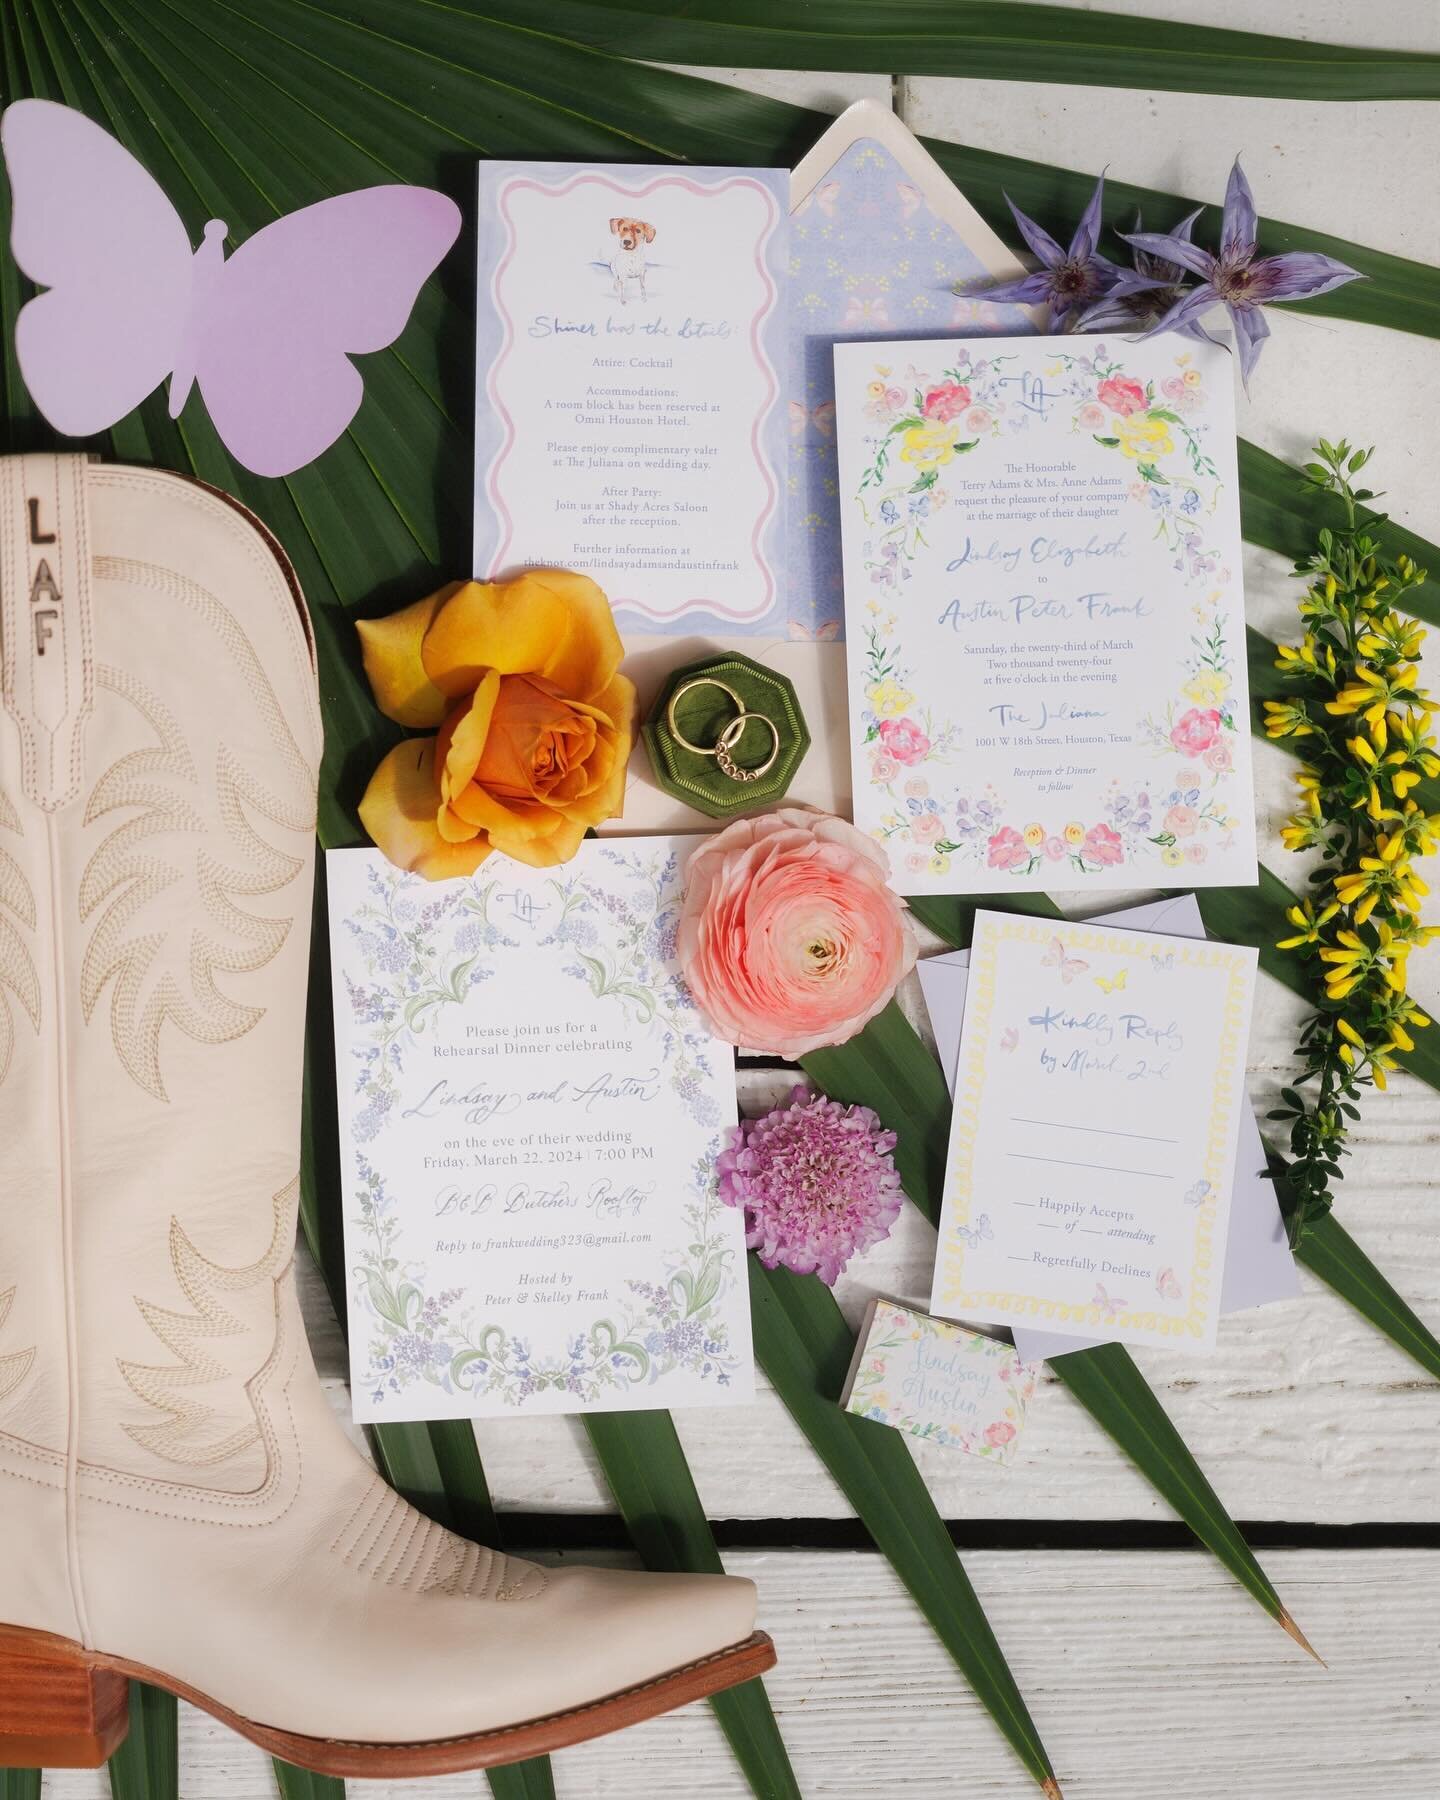 Don&rsquo;t mind us, we&rsquo;re just over here swooning at these details 😍

Planning: @bschneider1392 for Kelly Doonan Events
Photography: @marklsimmons 
Branding and Paper Goods: @studio.halfmoon 
Florals: @flowerpowerproductions 
Venue: @thejulia